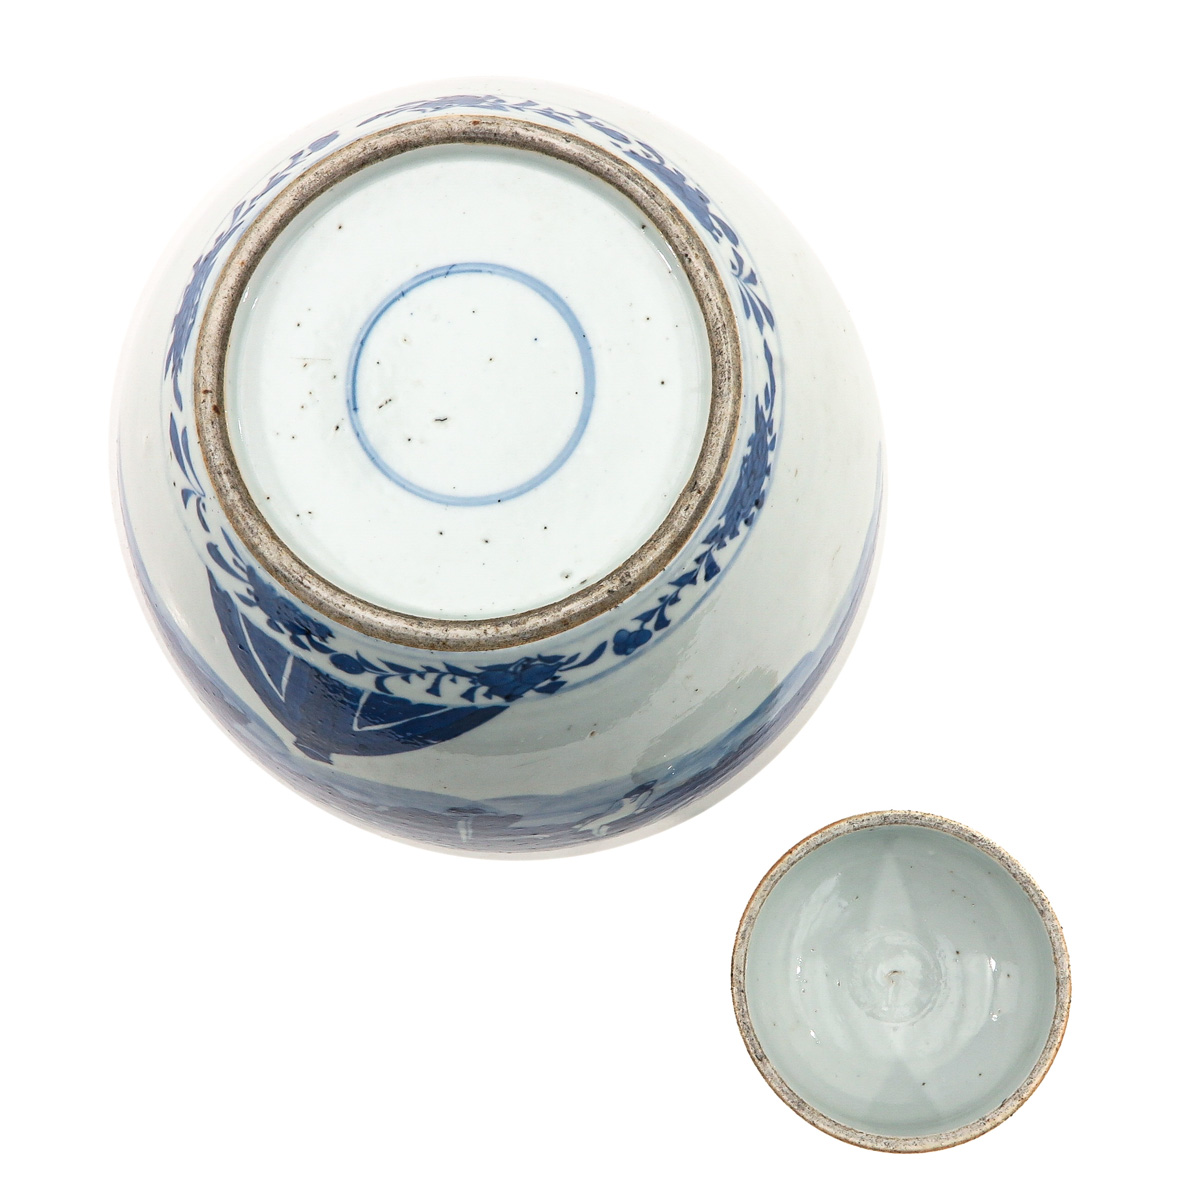 A Blue and White Ginger Jar - Image 6 of 10